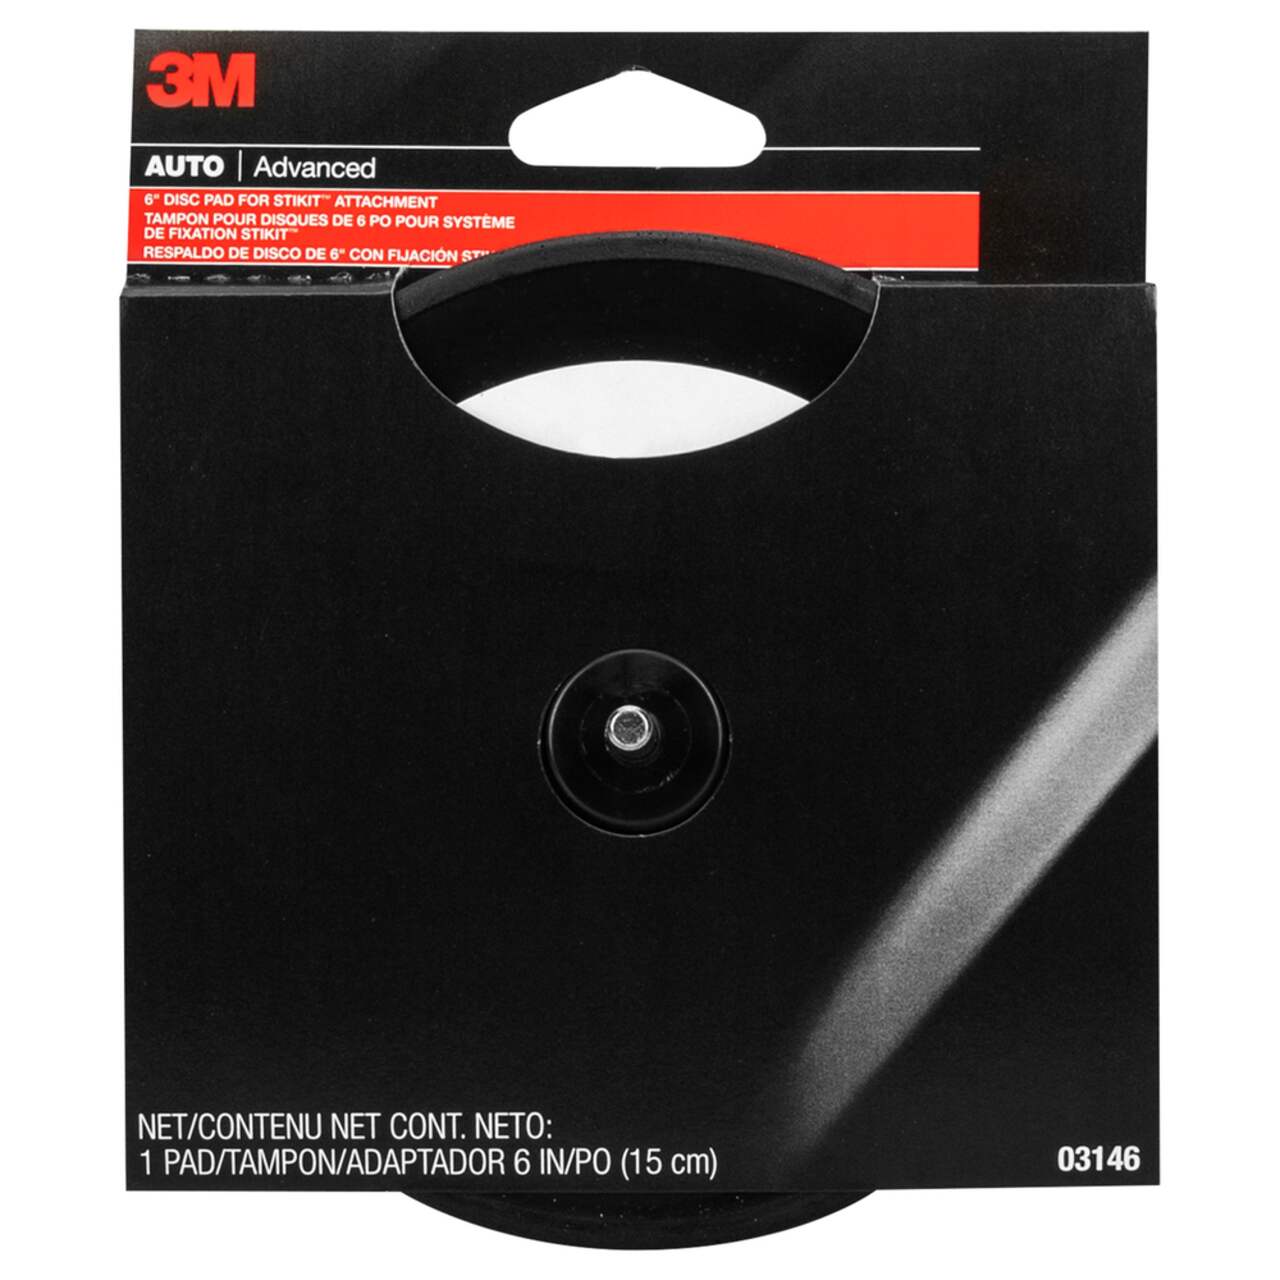 https://media-www.canadiantire.ca/product/automotive/car-care-accessories/auto-body-repair/0475911/6-adhesive-disc-pad-8c54da4f-4f03-458f-9053-bb7eb0e904d8.png?imdensity=1&imwidth=640&impolicy=mZoom